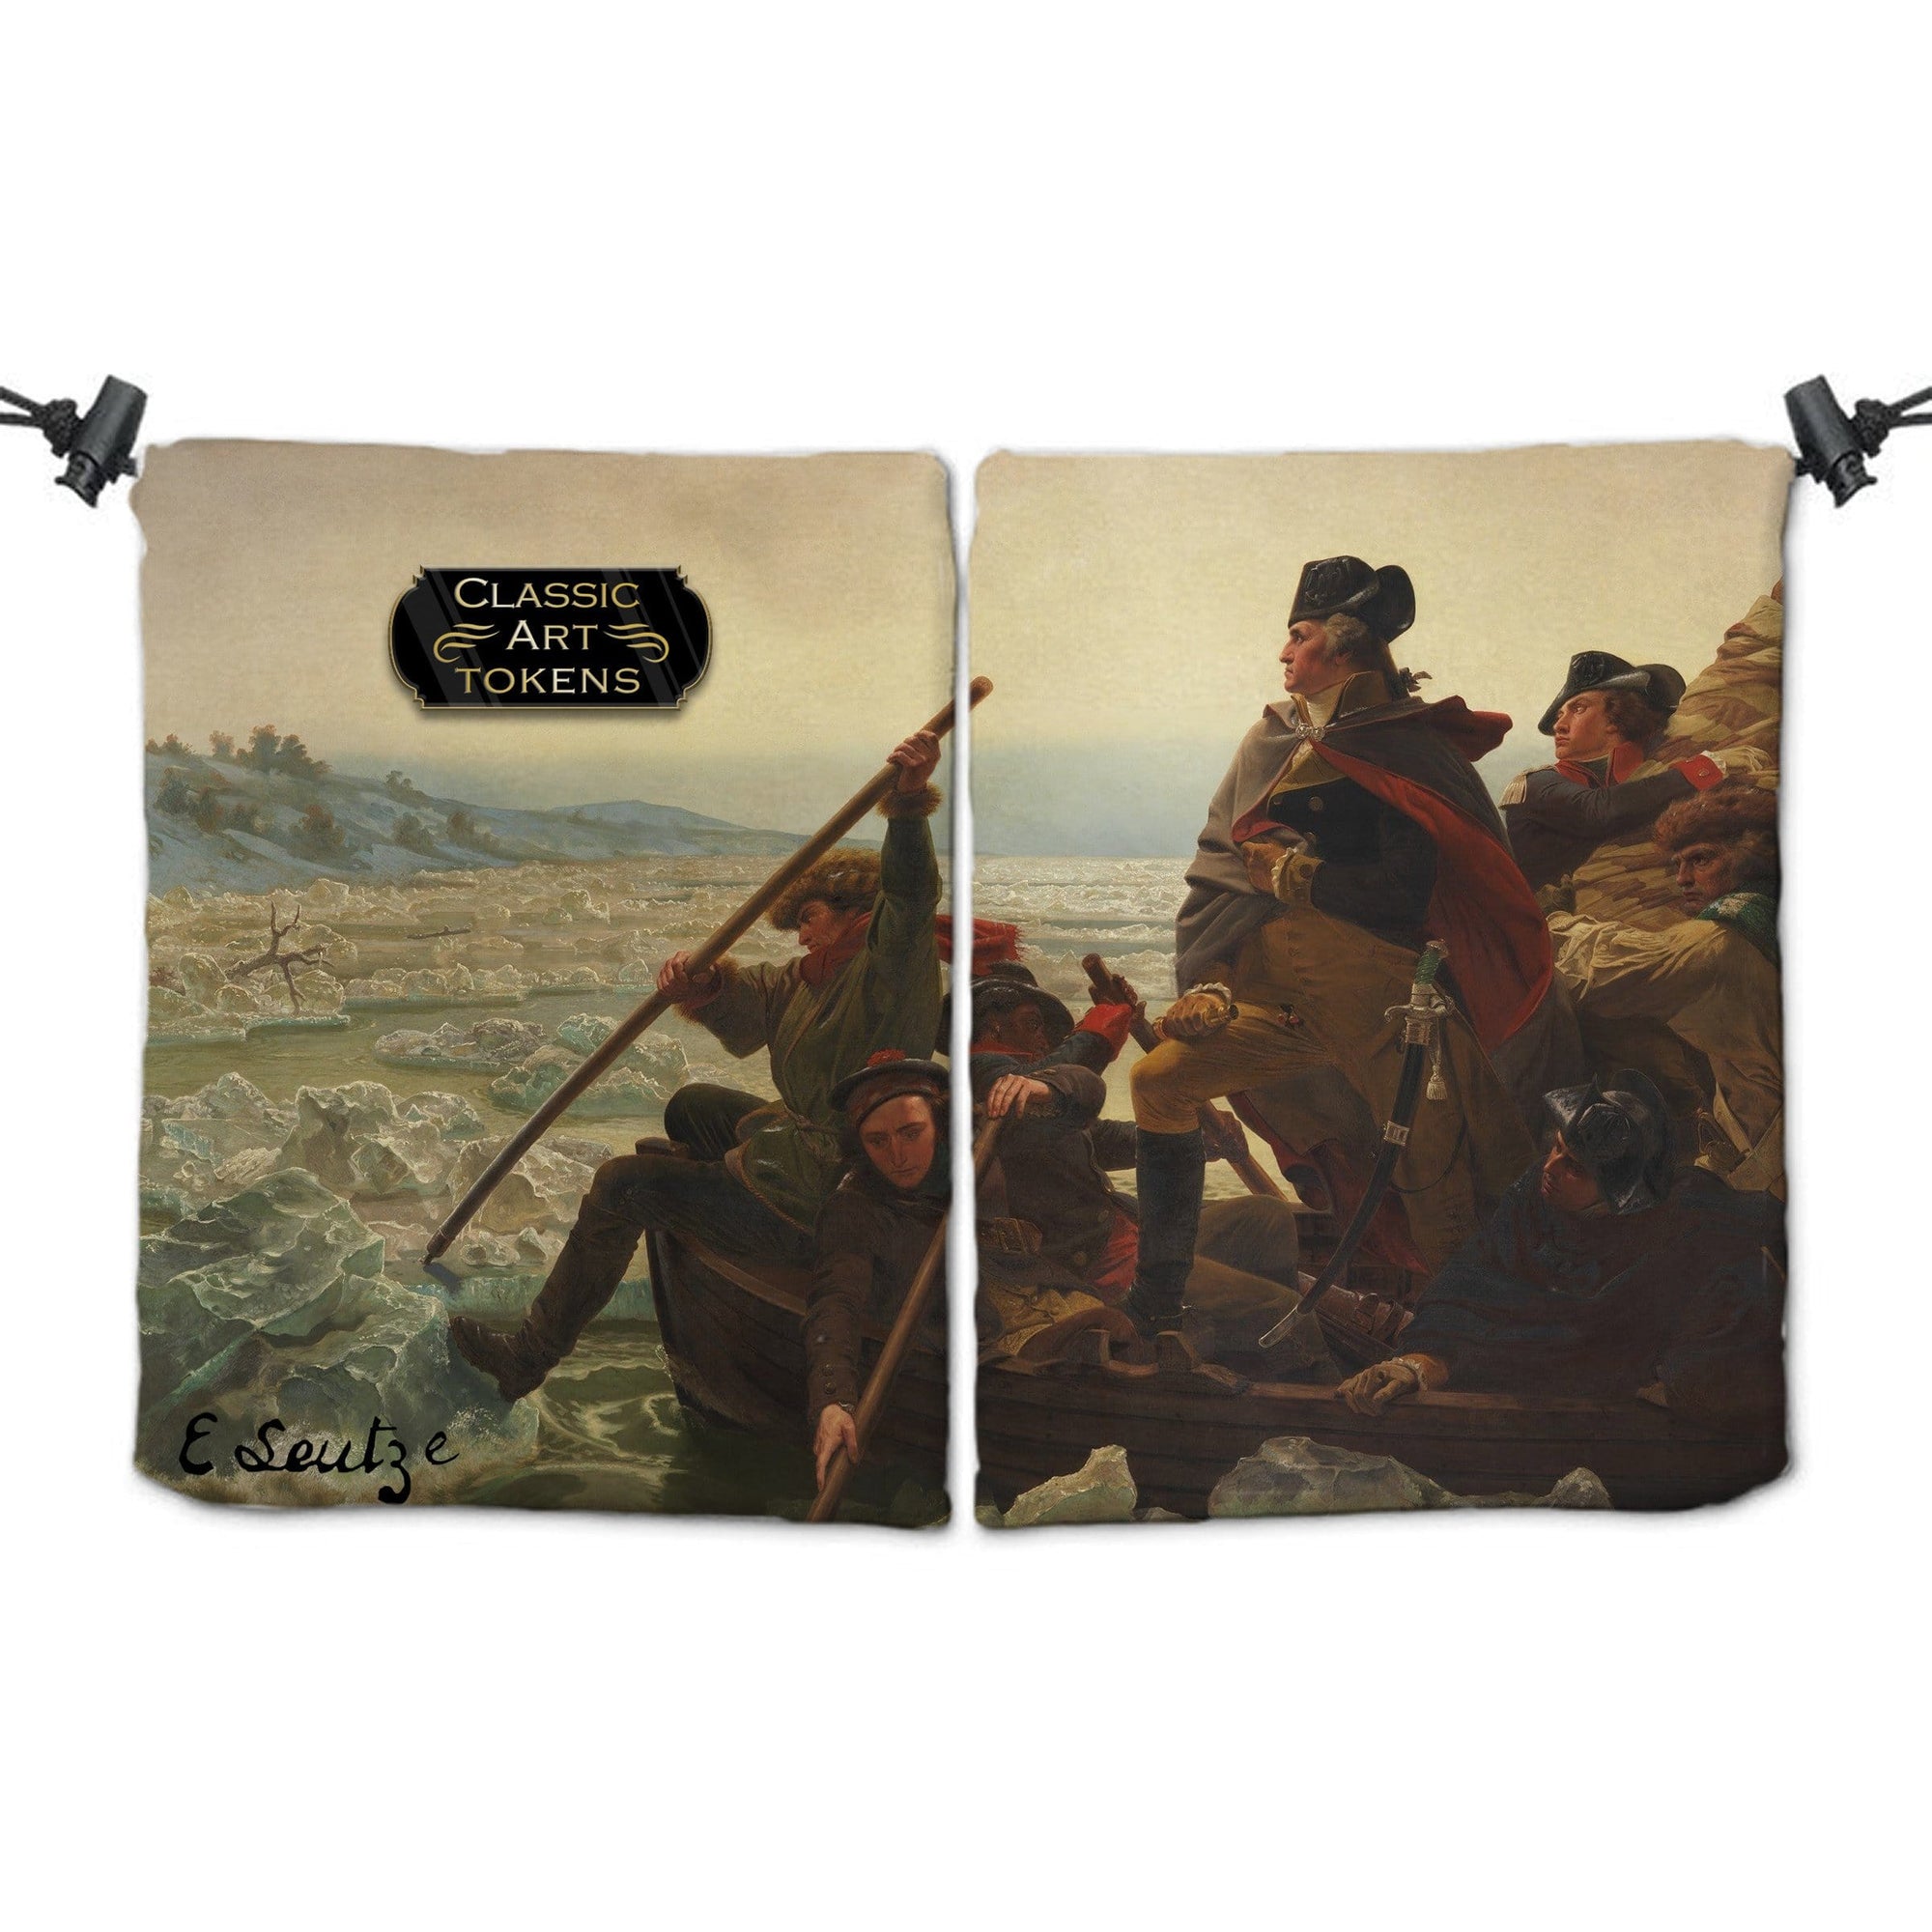 Soldier Dice Bag by Emanuel Leutze - Dice Bag - Original Magic Art - Accessories for Magic the Gathering and other card games